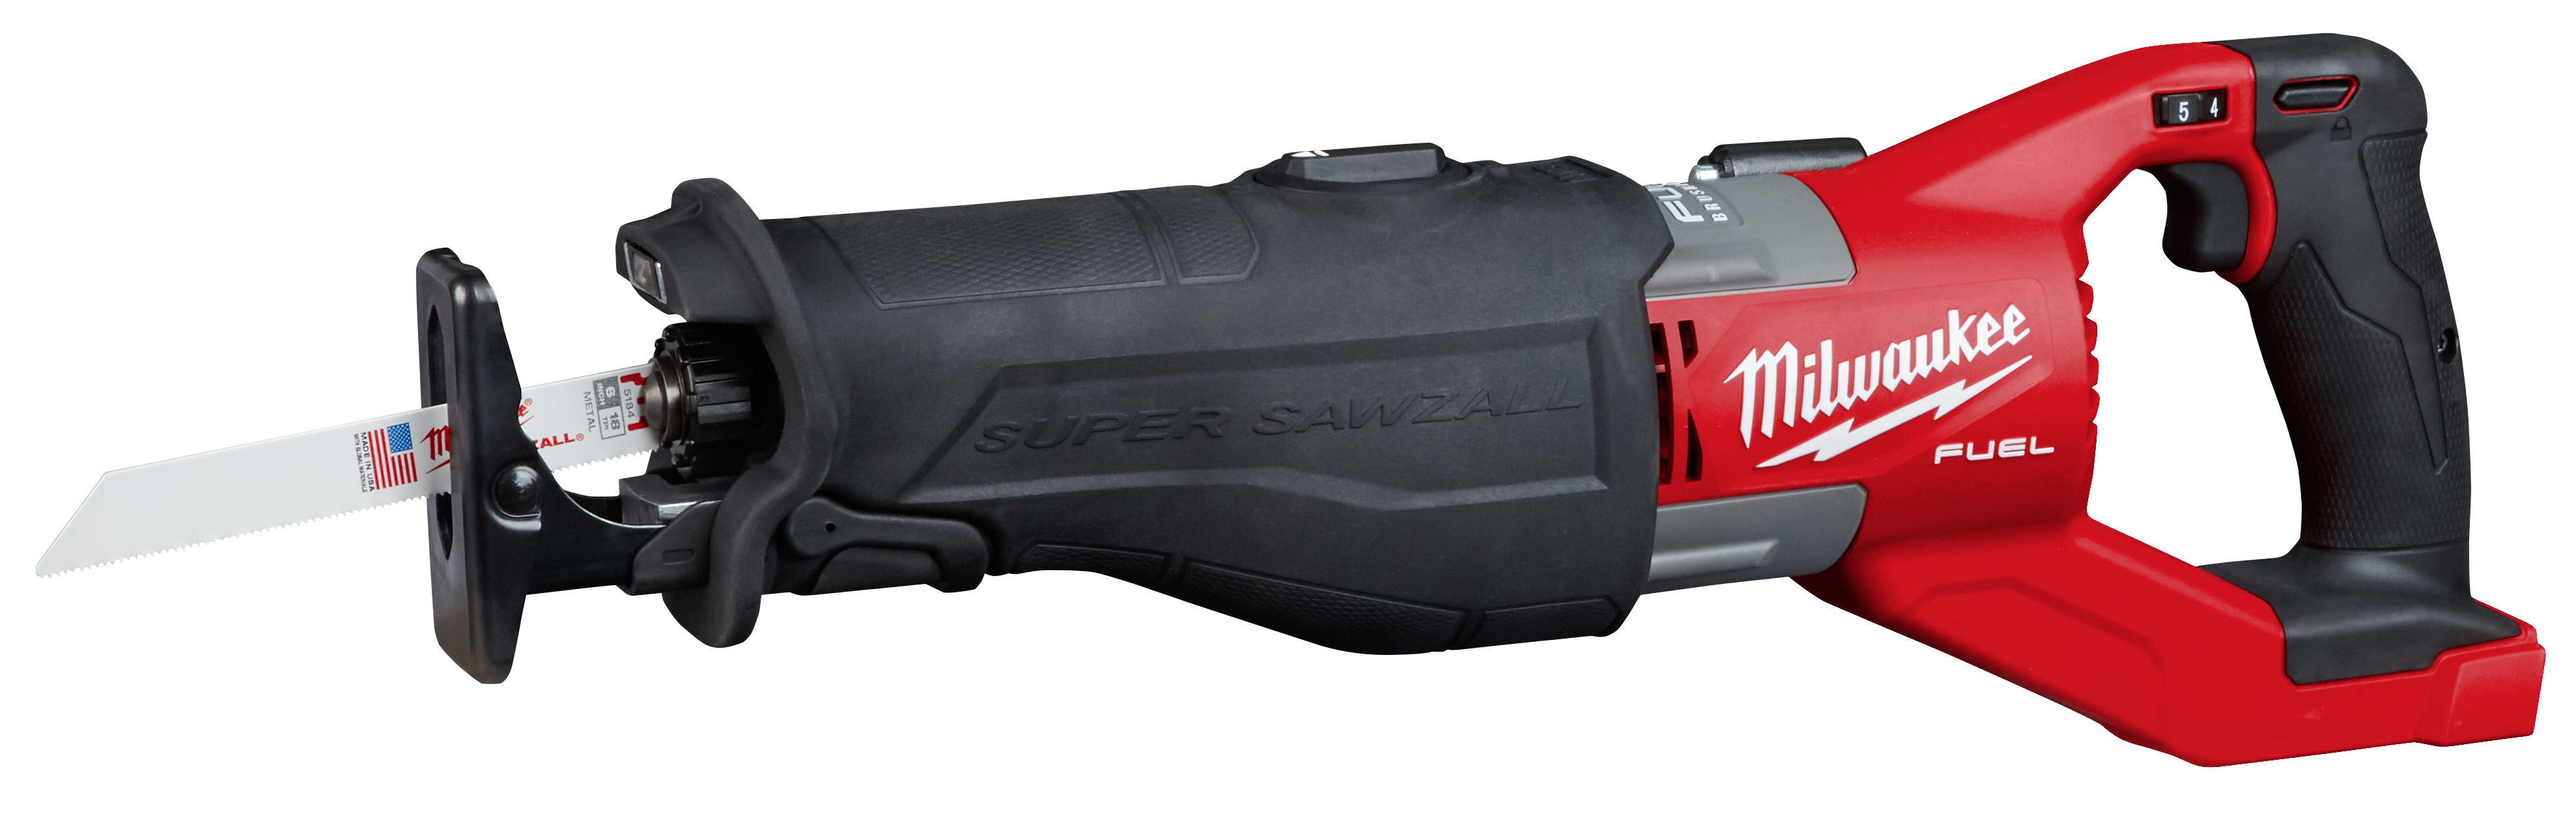 M18 FUEL™ SUPER SAWZALL®-Reconditioned Image